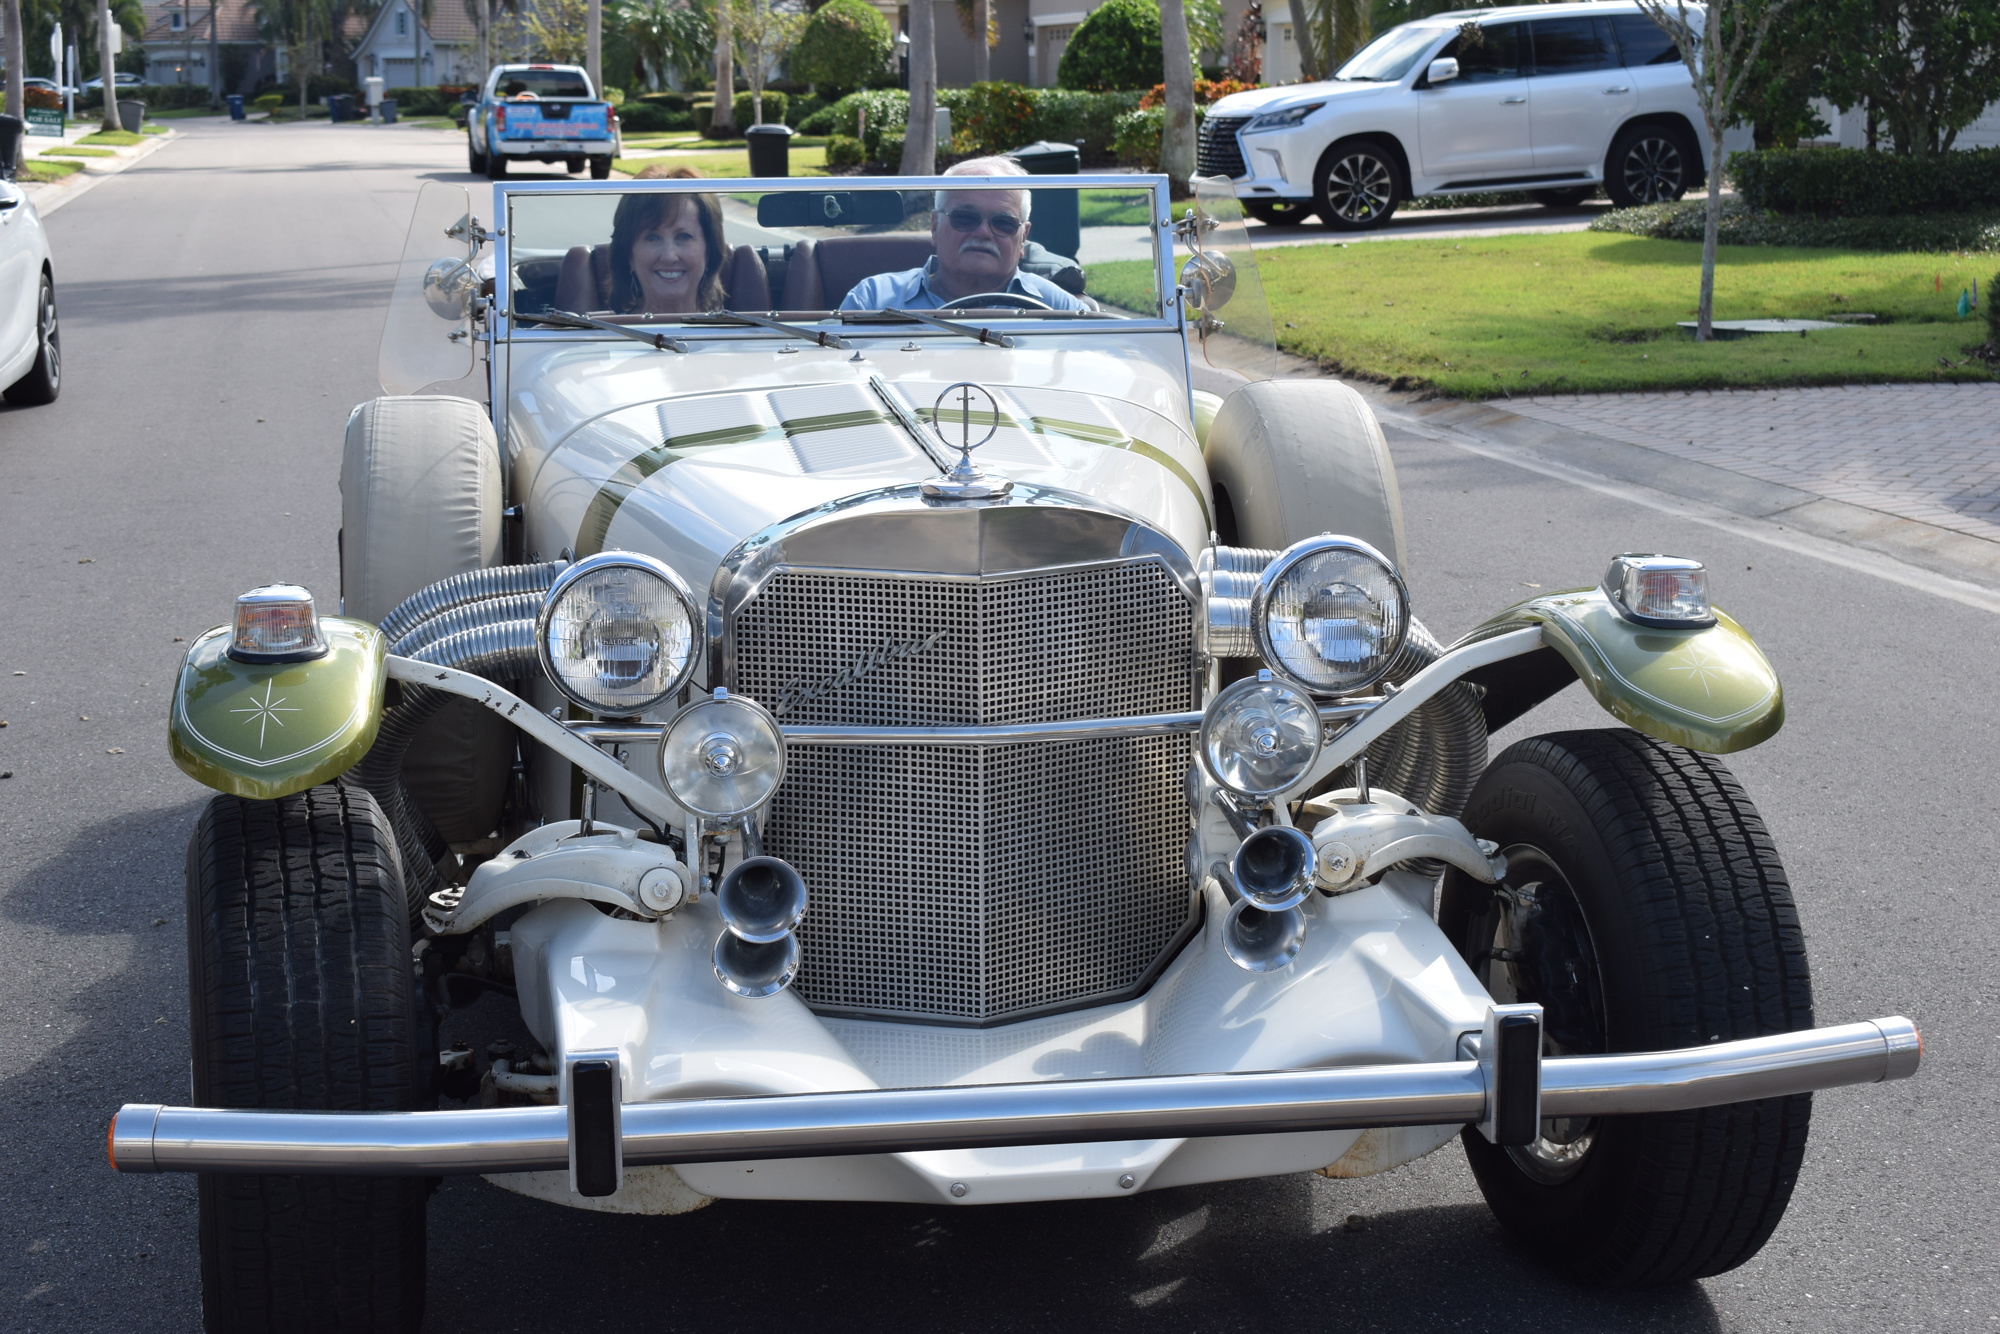 Lakewood Ranch car show features an Excalibur packed with family